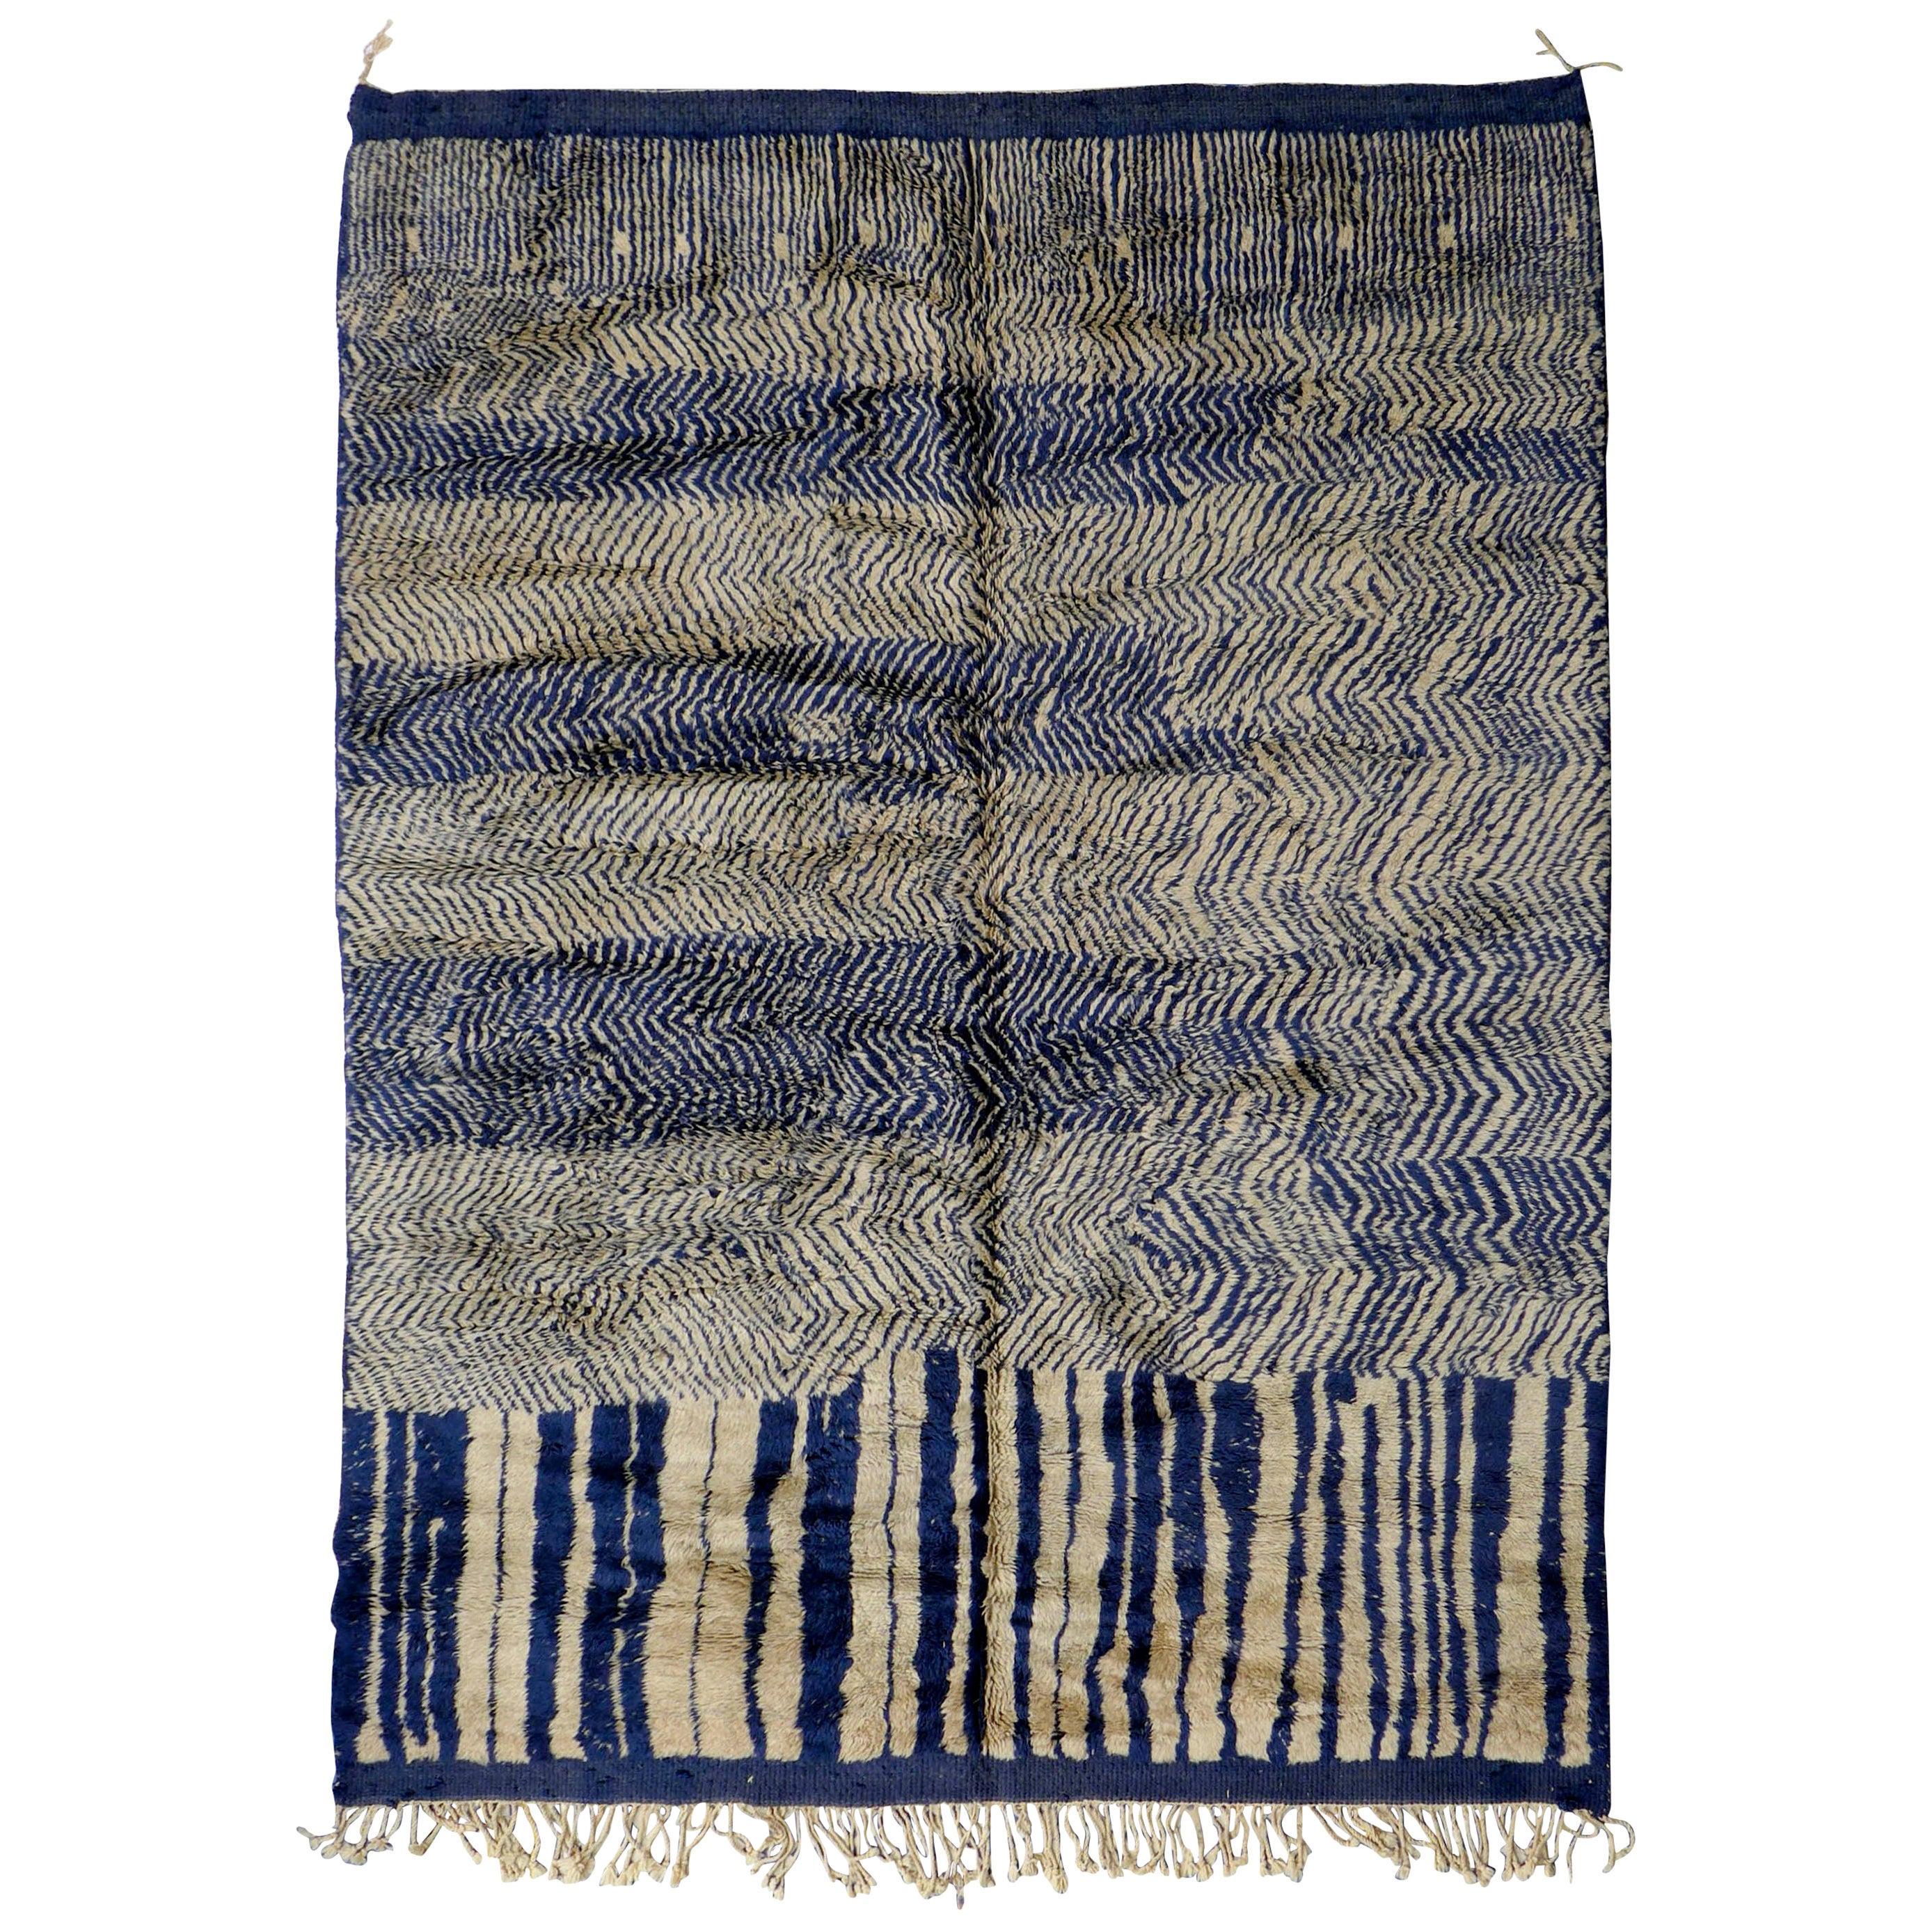 Blue and Gray Contemporary Moroccan Berber Rug